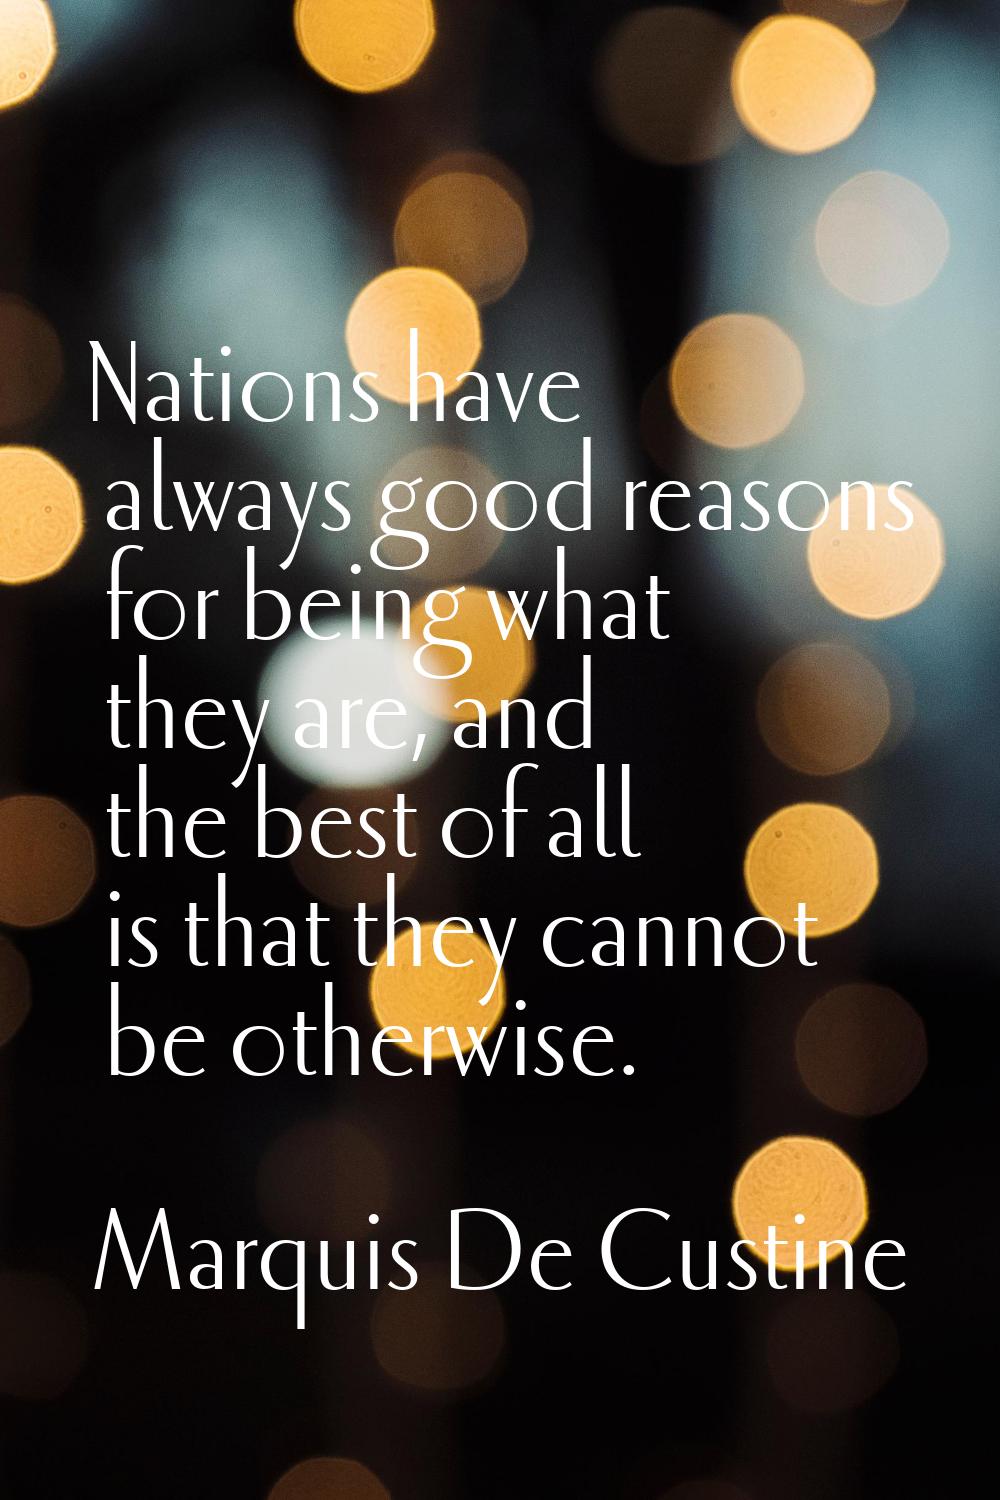 Nations have always good reasons for being what they are, and the best of all is that they cannot b